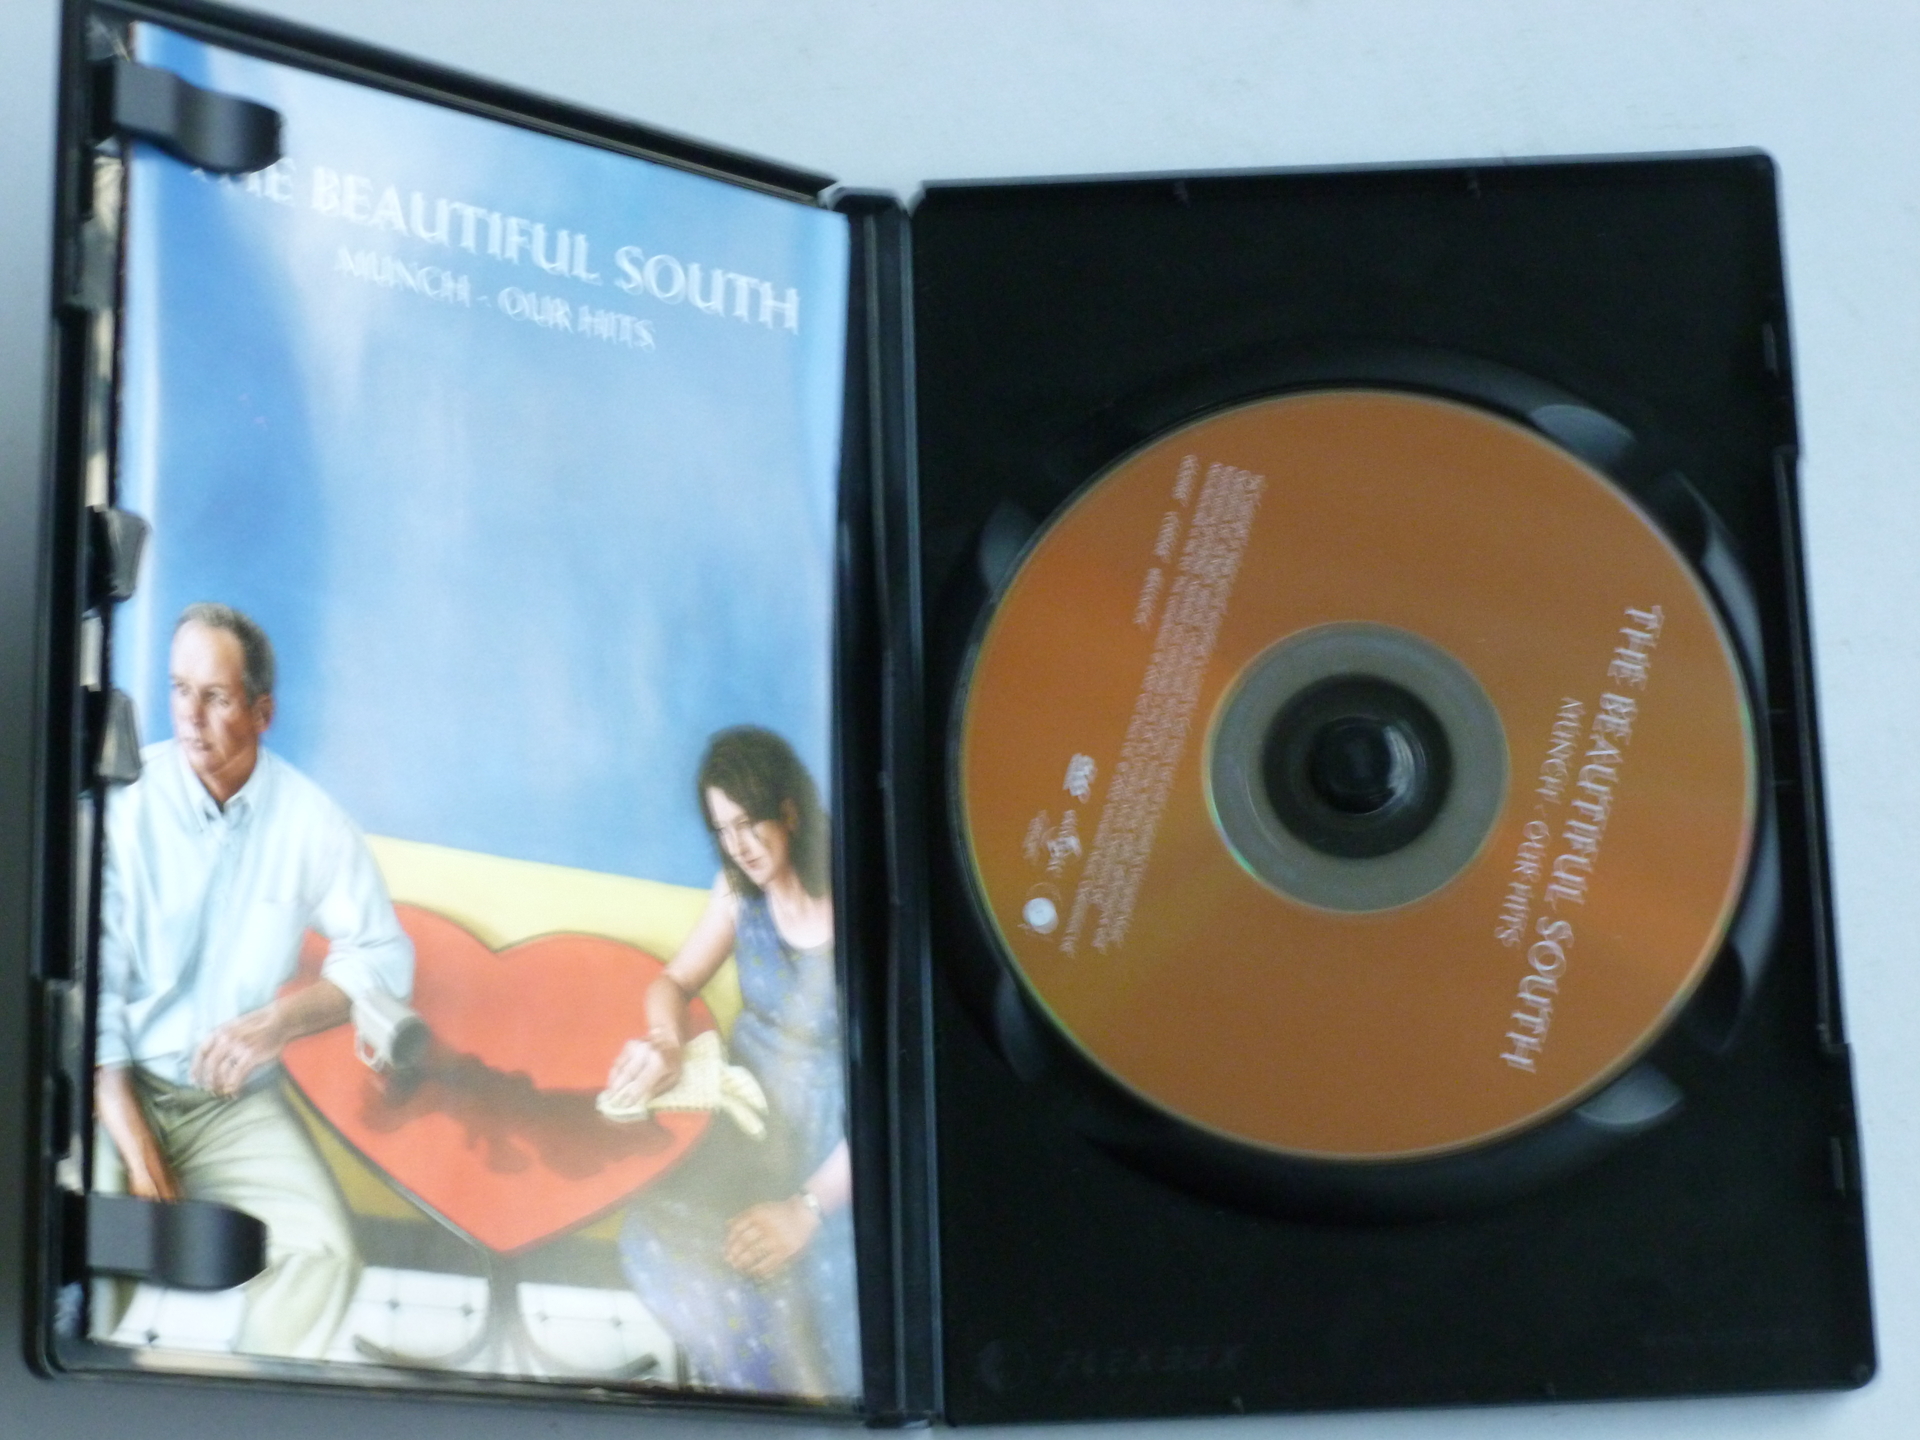 The Beautiful South - Munch / Our Hits (DVD) - Tweedehands CD